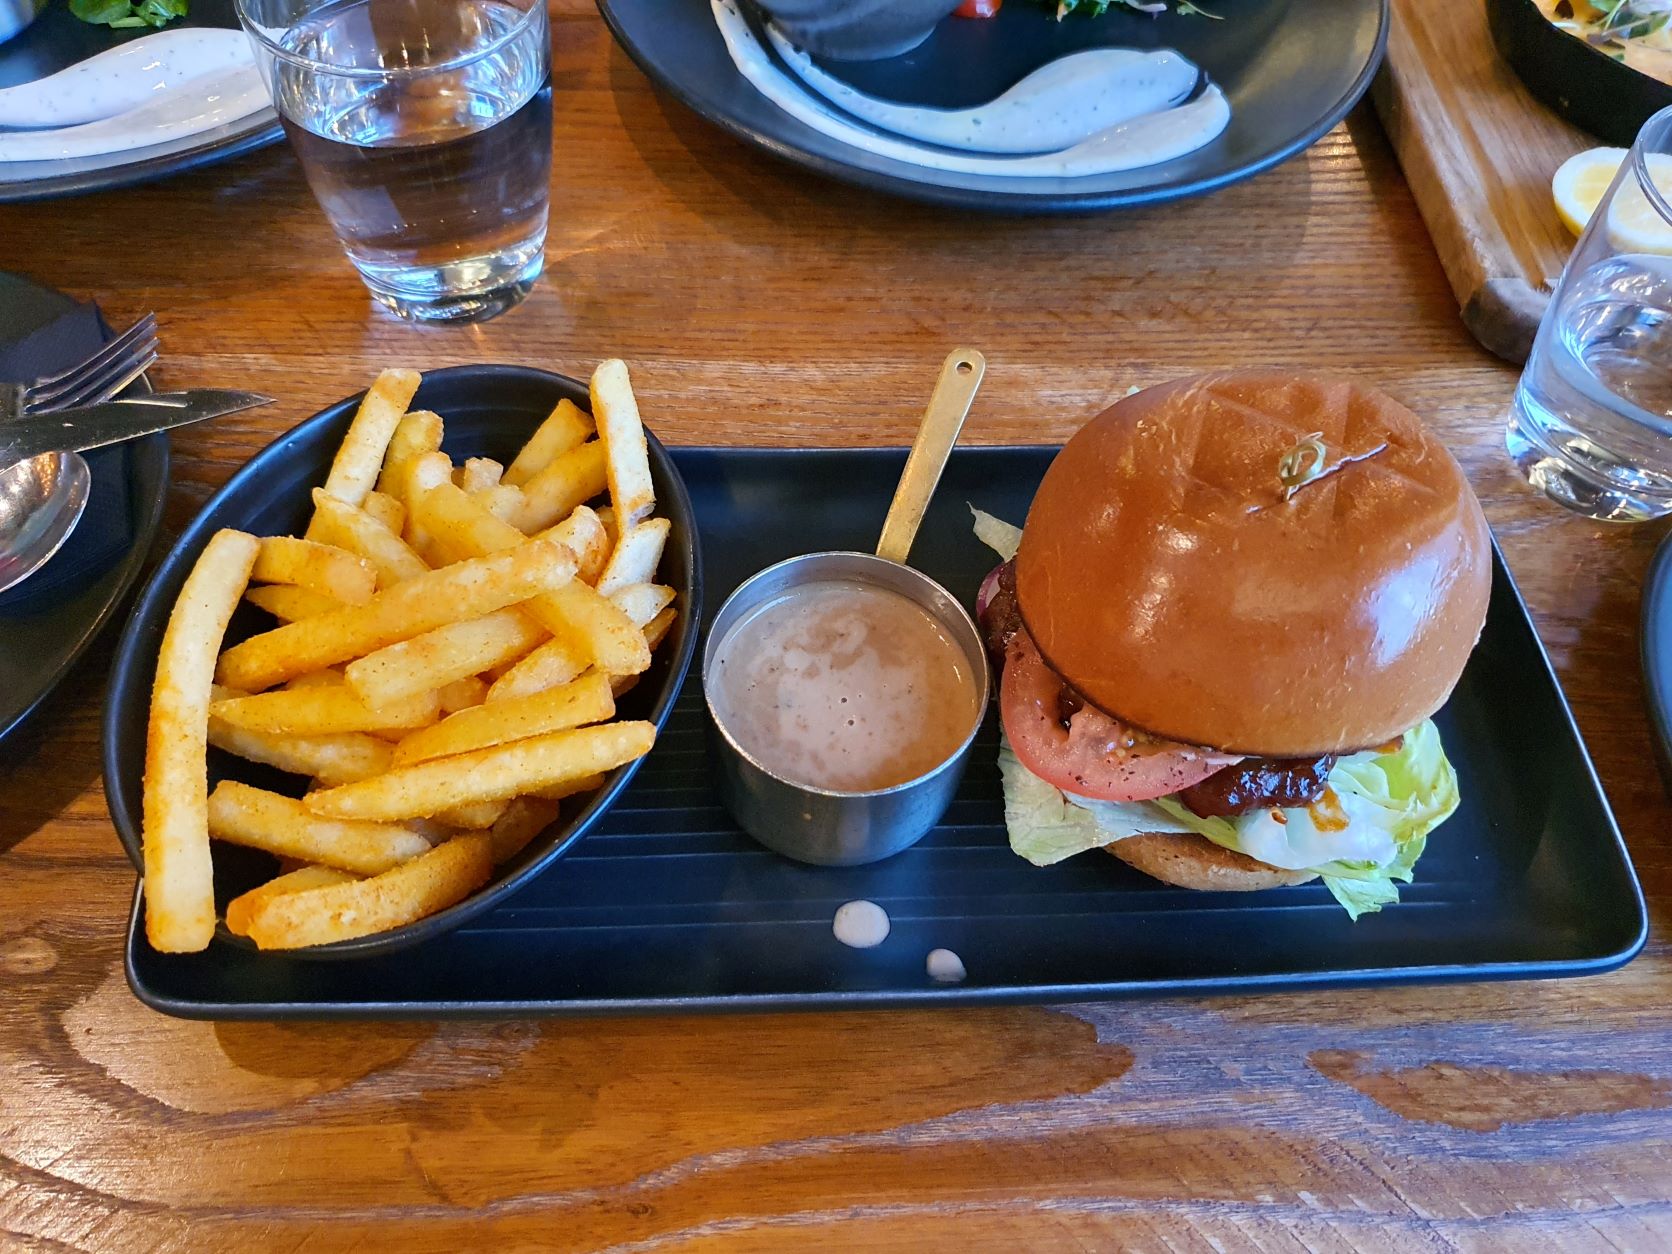 Burger and fries at Flame restaurant in Queenstown